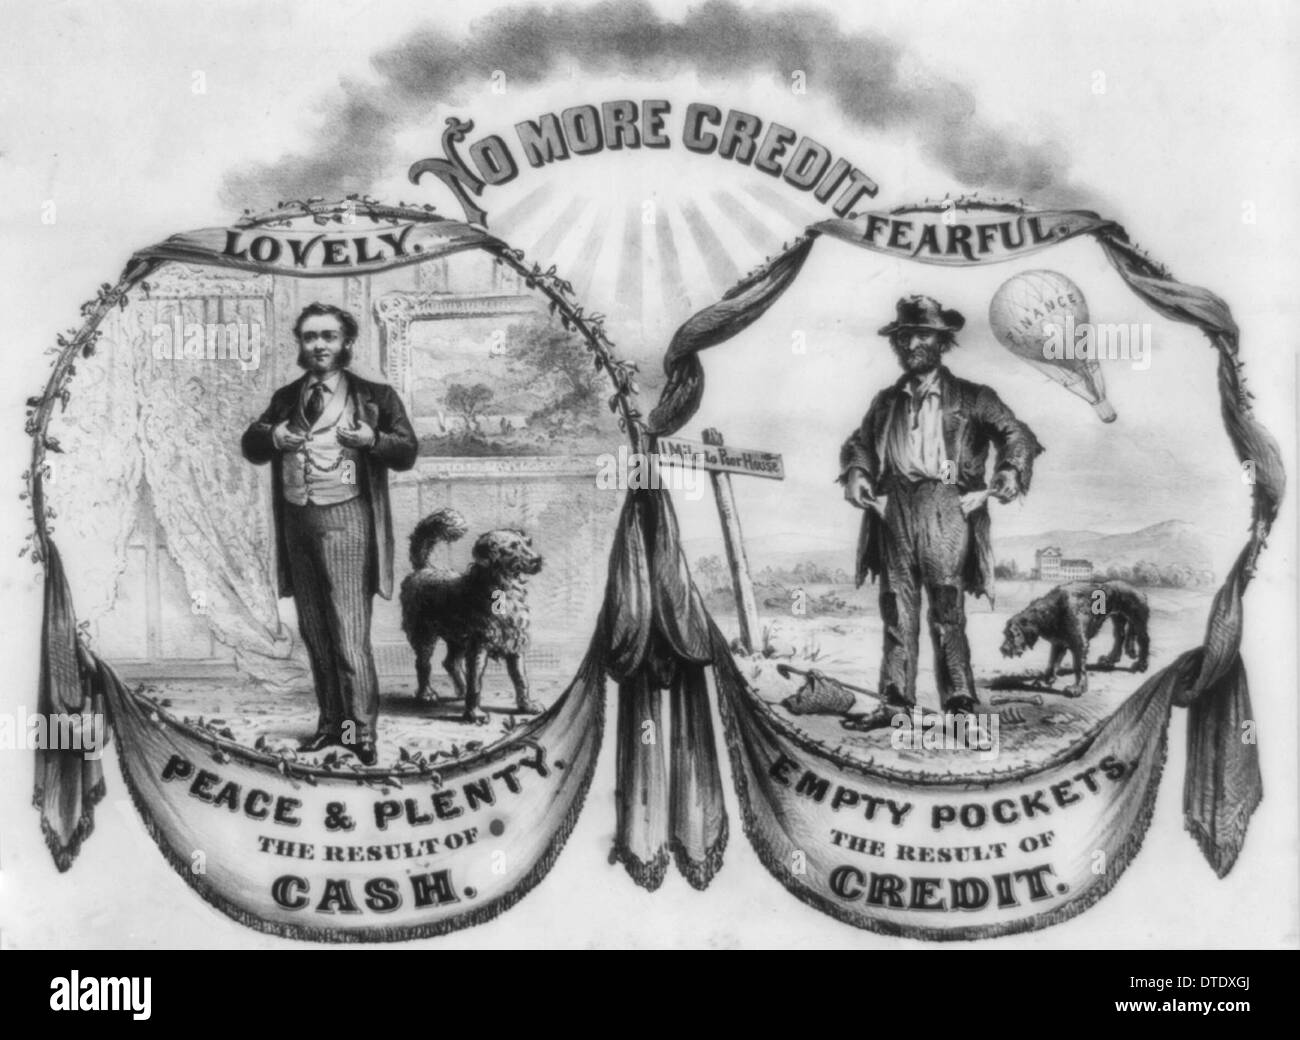 No more credit - Peace and Plenty - The result of Cash. Empty Pockets - The result of credit - Political ad, circa 1885 Stock Photo